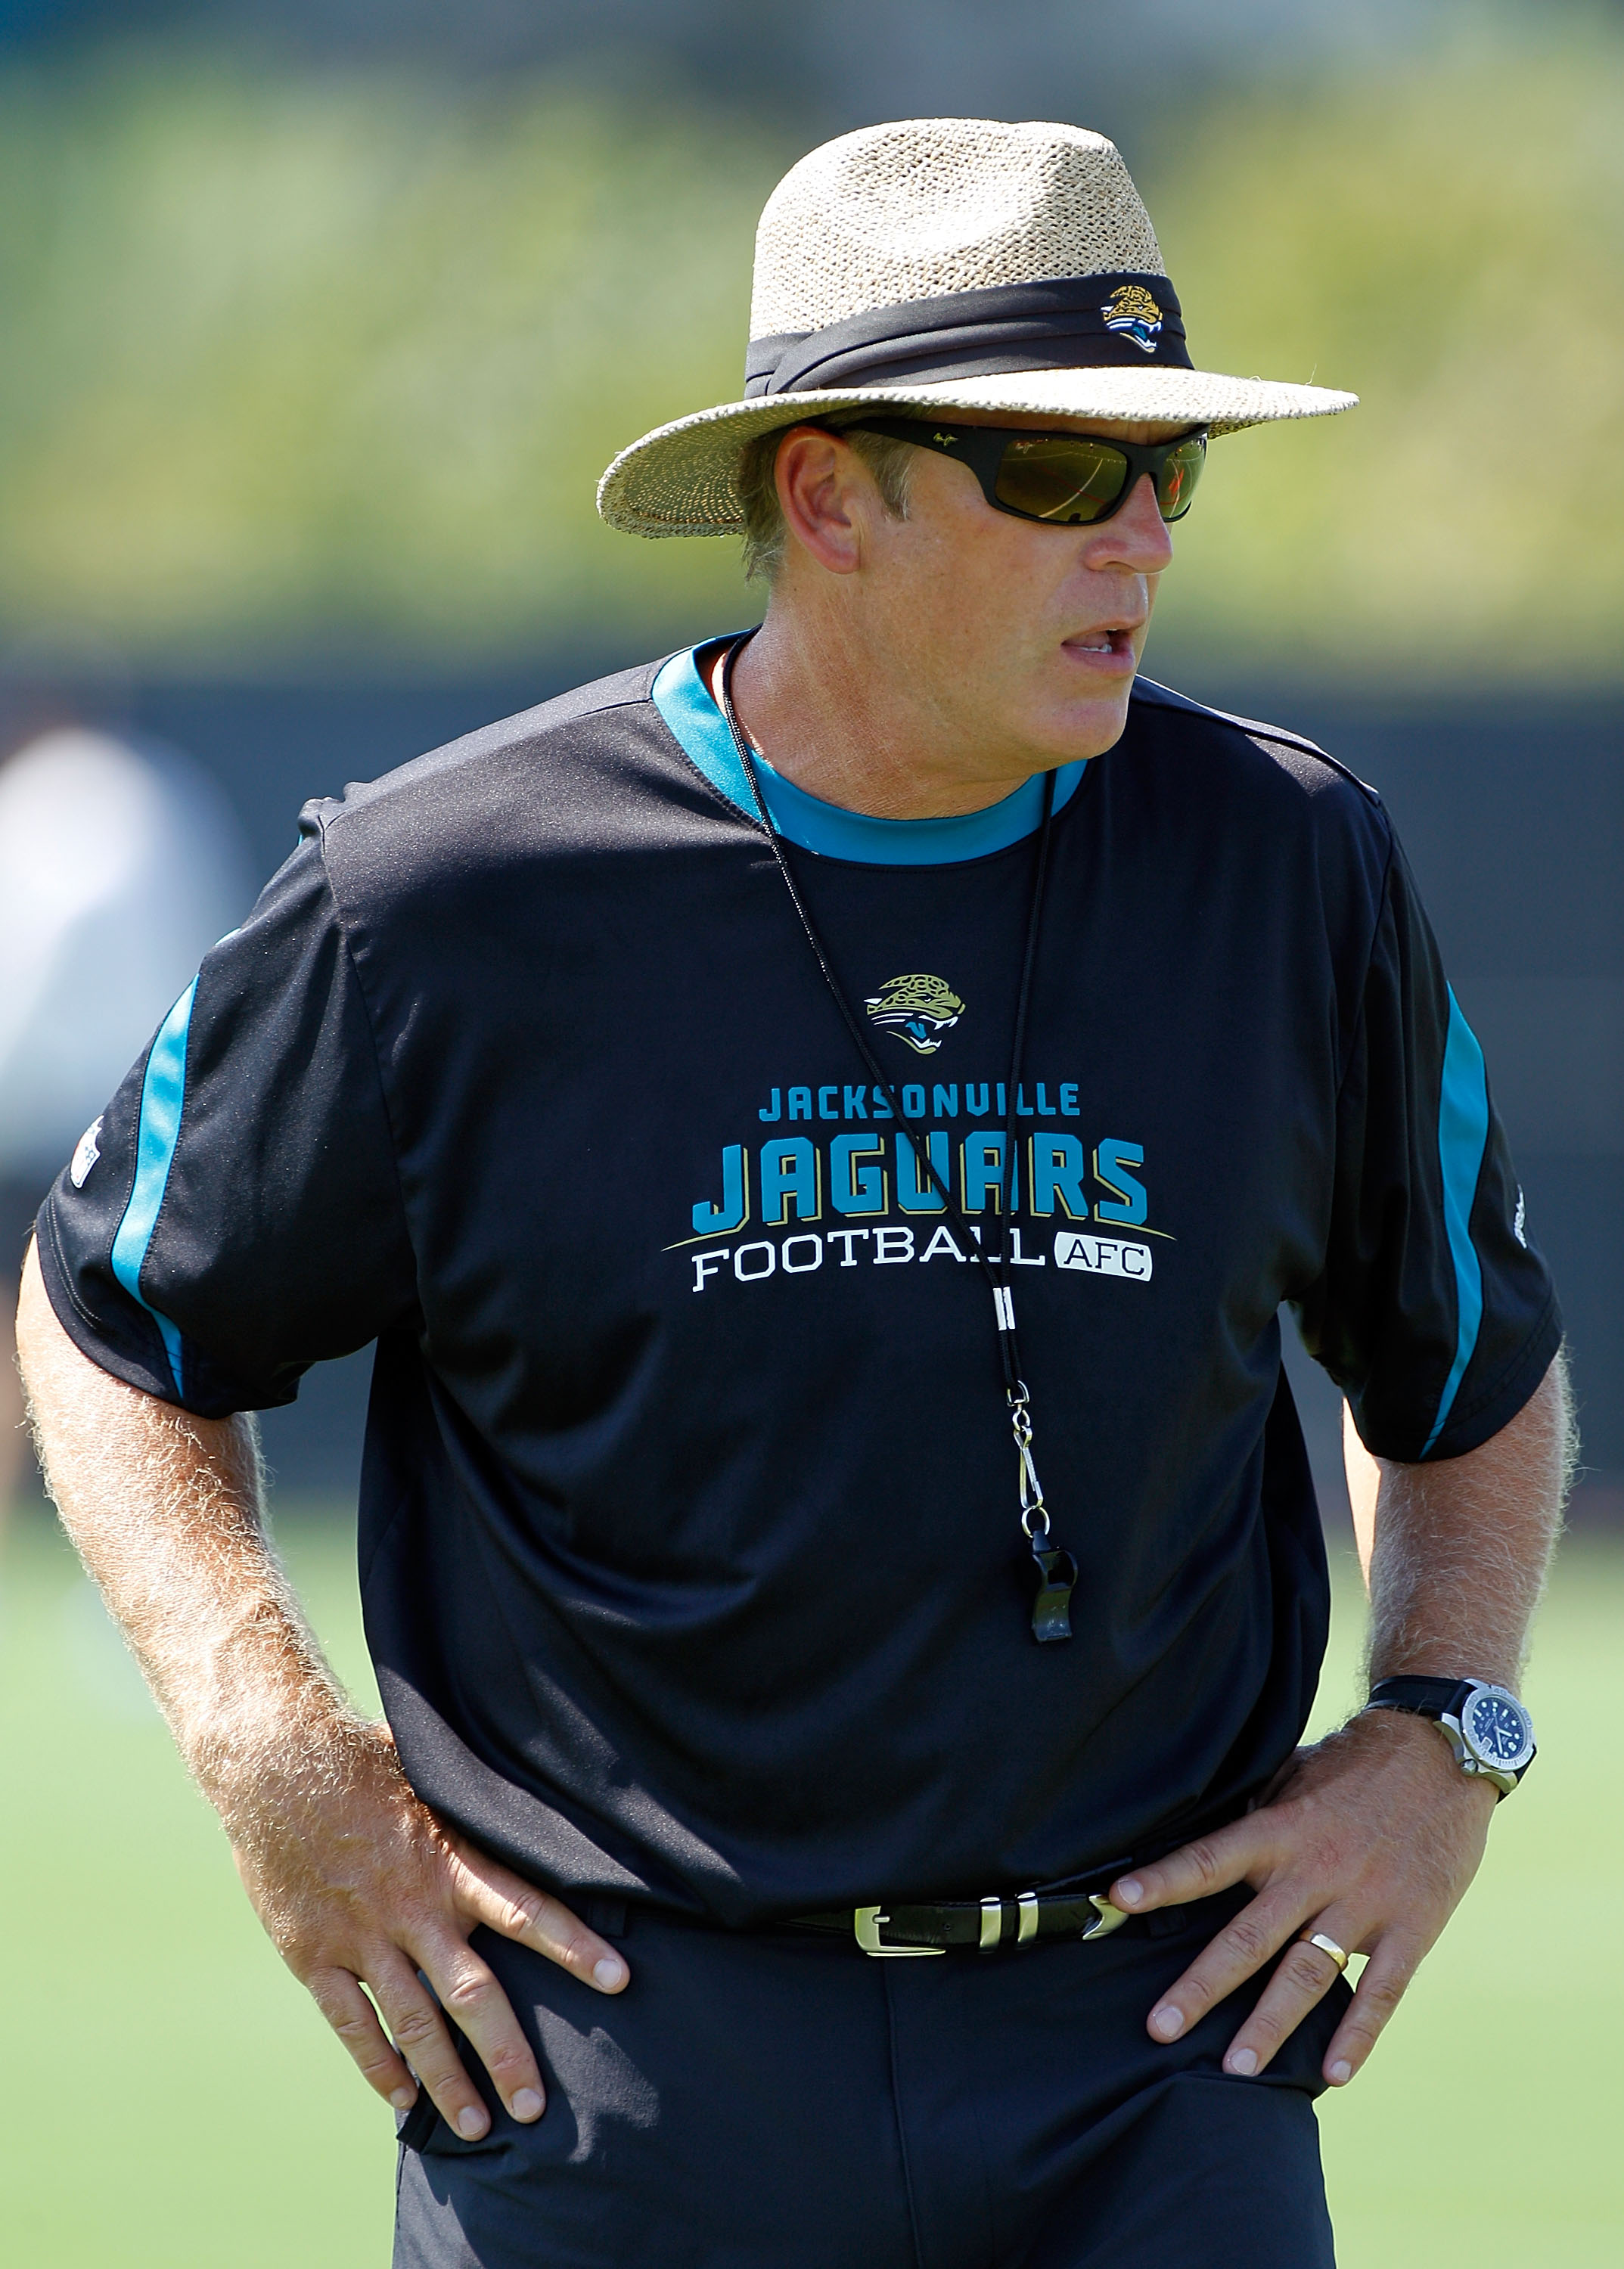 JACKSONVILLE, FL - JULY 30:  Head coach Jack Del Rio of the Jacksonville Jaguars during the first day of Training Camp at EverBank Field on July 30, 2010 in Jacksonville, Florida.  (Photo by Sam Greenwood/Getty Images)